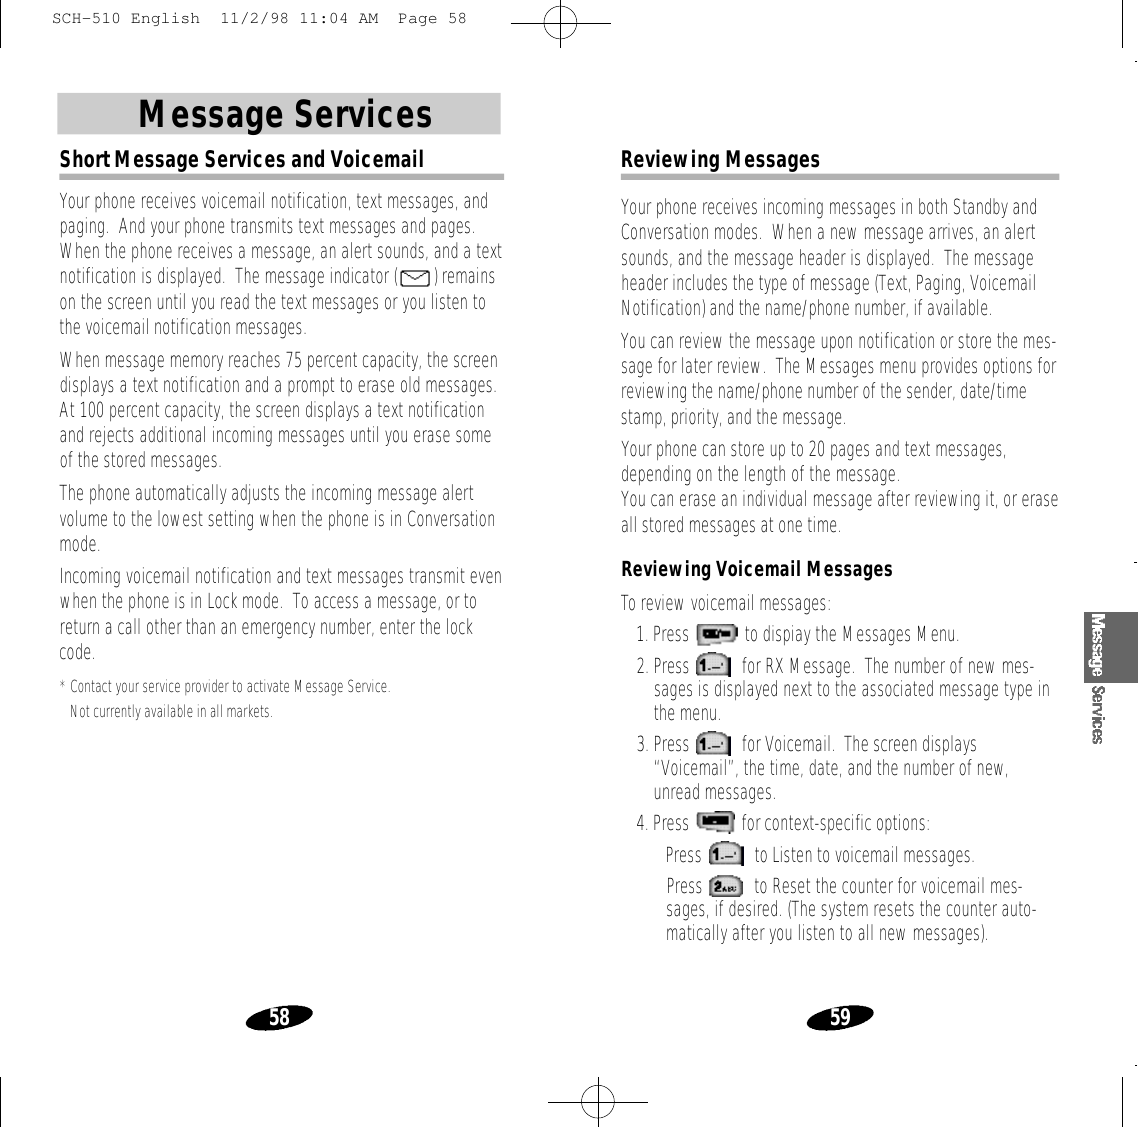 59Message Services58Short Message Services and VoicemailYour phone receives voicemail notification, text messages, andpaging.  And your phone transmits text messages and pages.When the phone receives a message, an alert sounds, and a textnotification is displayed.  The message indicator ( ) remainson the screen until you read the text messages or you listen tothe voicemail notification messages.When message memory reaches 75 percent capacity, the screendisplays a text notification and a prompt to erase old messages.At 100 percent capacity, the screen displays a text notificationand rejects additional incoming messages until you erase someof the stored messages.The phone automatically adjusts the incoming message alertvolume to the lowest setting when the phone is in Conversationmode.Incoming voicemail notification and text messages transmit evenwhen the phone is in Lock mode.  To access a message, or toreturn a call other than an emergency number, enter the lockcode.*Contact your service provider to activate Message Service. Not currently available in all markets.Reviewing MessagesYour phone receives incoming messages in both Standby andConversation modes.  When a new message arrives, an alertsounds, and the message header is displayed.  The messageheader includes the type of message (Text, Paging, VoicemailNotification) and the name/phone number, if available.You can review the message upon notification or store the mes-sage for later review.  The Messages menu provides options forreviewing the name/phone number of the sender, date/timestamp, priority, and the message.Your phone can store up to 20 pages and text messages,depending on the length of the message.You can erase an individual message after reviewing it, or eraseall stored messages at one time.Reviewing Voicemail MessagesTo review voicemail messages:1. Press  to dispiay the Messages Menu. 2. Press  for RX Message.  The number of new mes-sages is displayed next to the associated message type inthe menu.3. Press  for Voicemail.  The screen displays“Voicemail”, the time, date, and the number of new,unread messages.4. Press  for context-specific options:• Press  to Listen to voicemail messages.• Press  to Reset the counter for voicemail mes-sages, if desired. (The system resets the counter auto-matically after you listen to all new messages).SCH-510 English  11/2/98 11:04 AM  Page 58